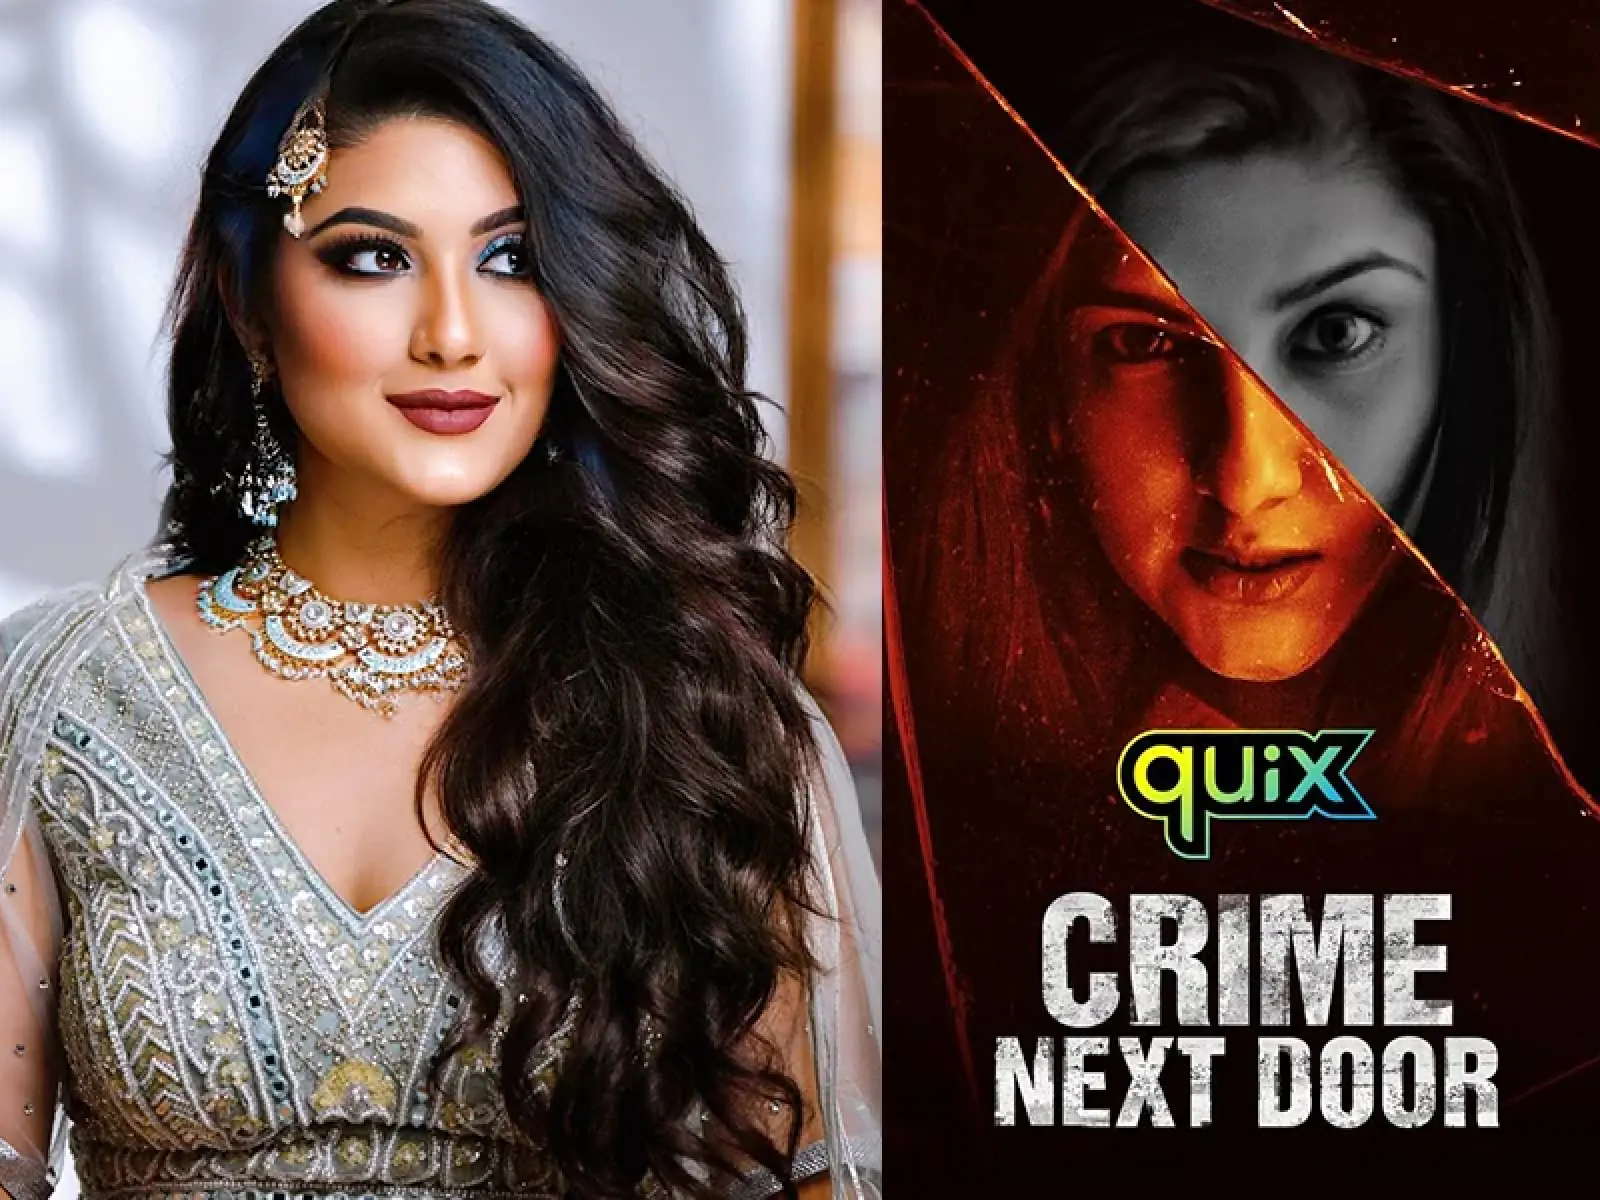 Meet Harshil Kalia Model- Actress who has worked in a Disney+ Hotstar serial called 'Crime Next Door'